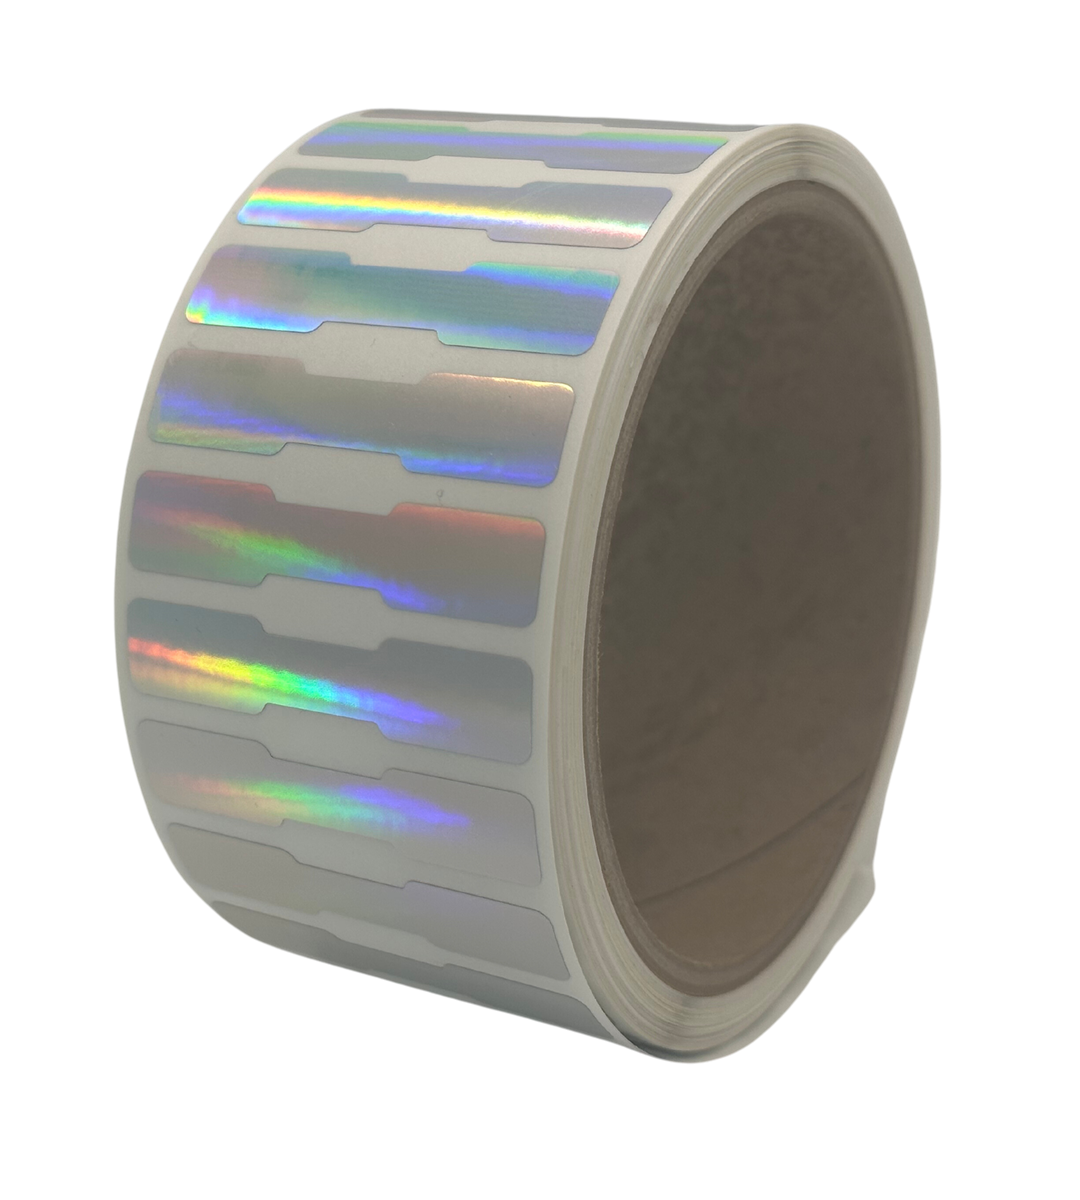 500 Rainbow Tamper-Evident Security Labels TamperColor® Seal Stickers, Dogbone Shape Size 1.75" x 0.375 (44mm x 9mm).